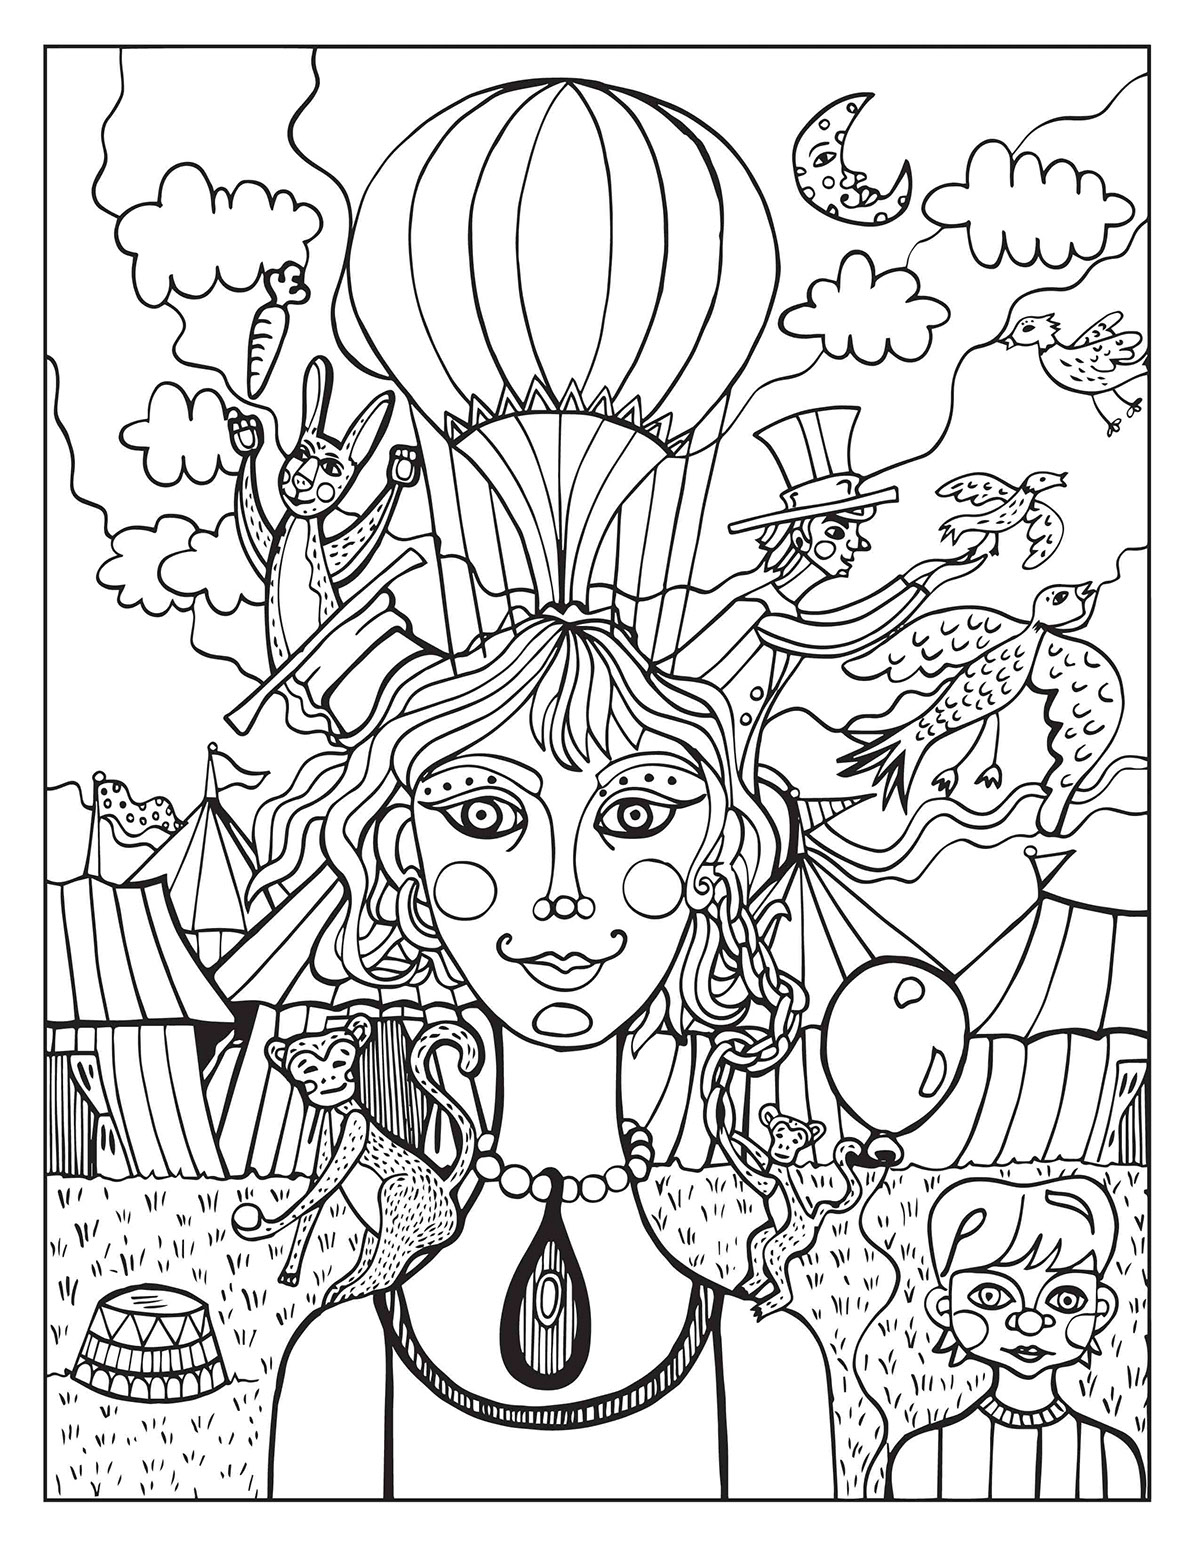 220 Animal Coloring Pages Circus for Adult